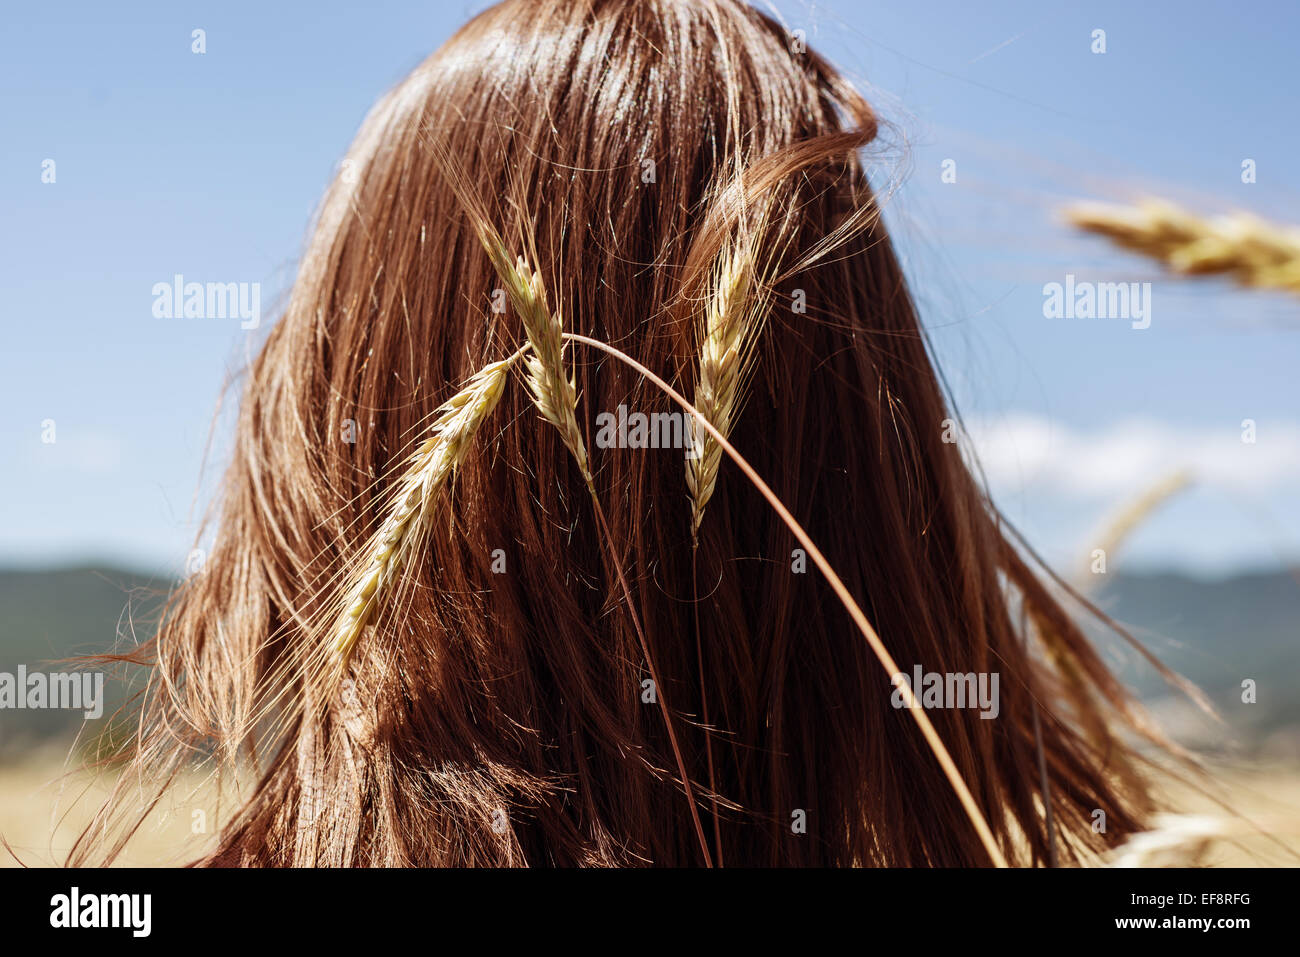 Rear view of young woman's head with ear of wheat Stock Photo